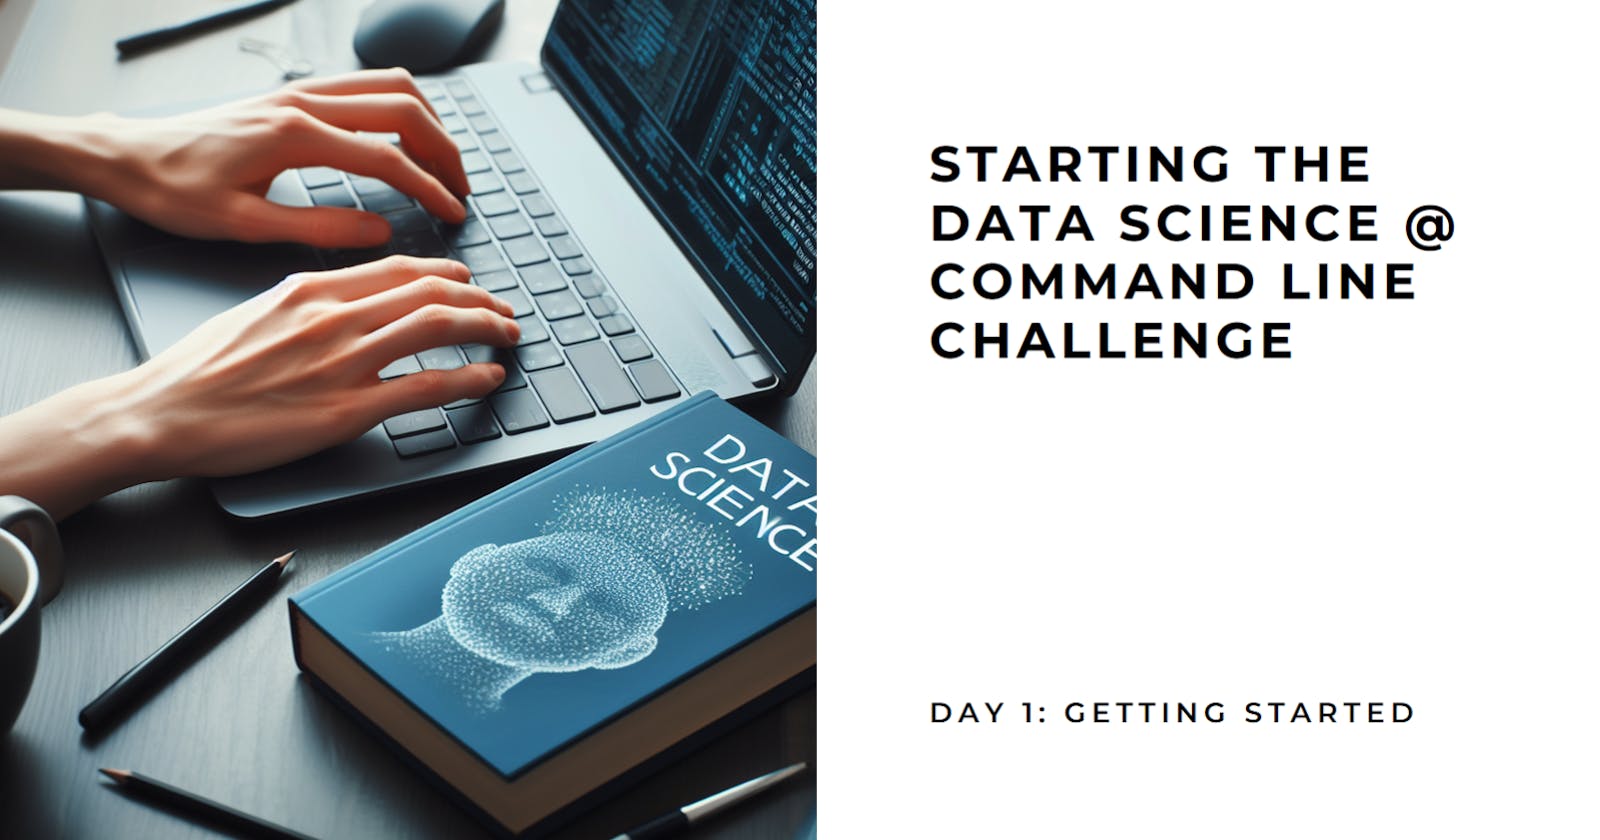 Embarking on the Data Science @ Command Line Challenge: Day 1 - Getting Started